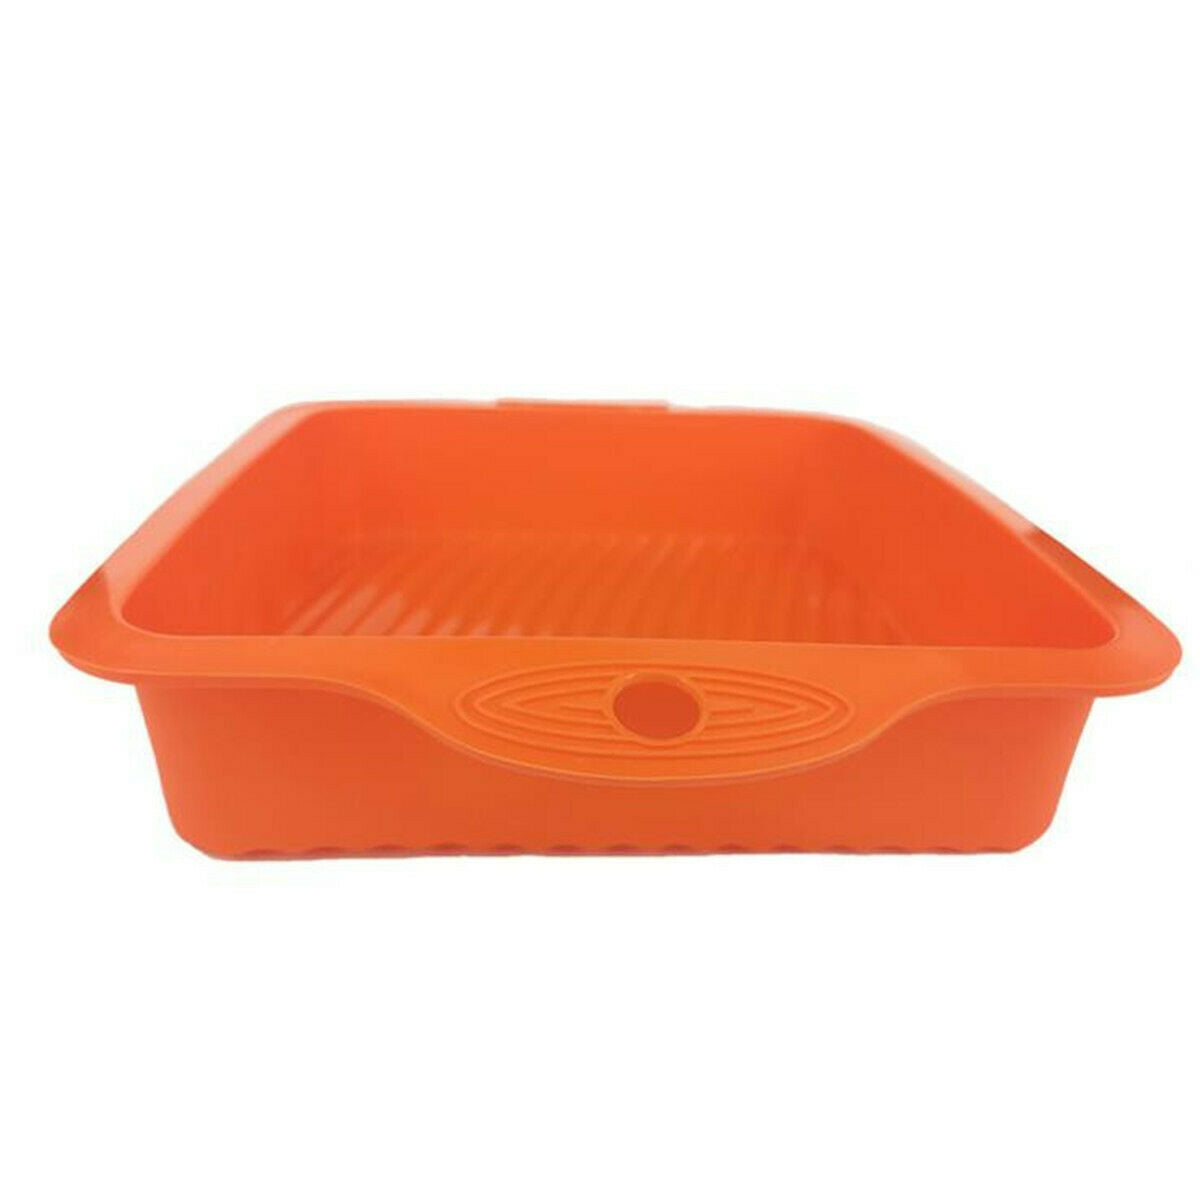 Square Silicone Cake Mold Pan Bread Chocolate Pizza Pastry Baking Tray DIY Mould